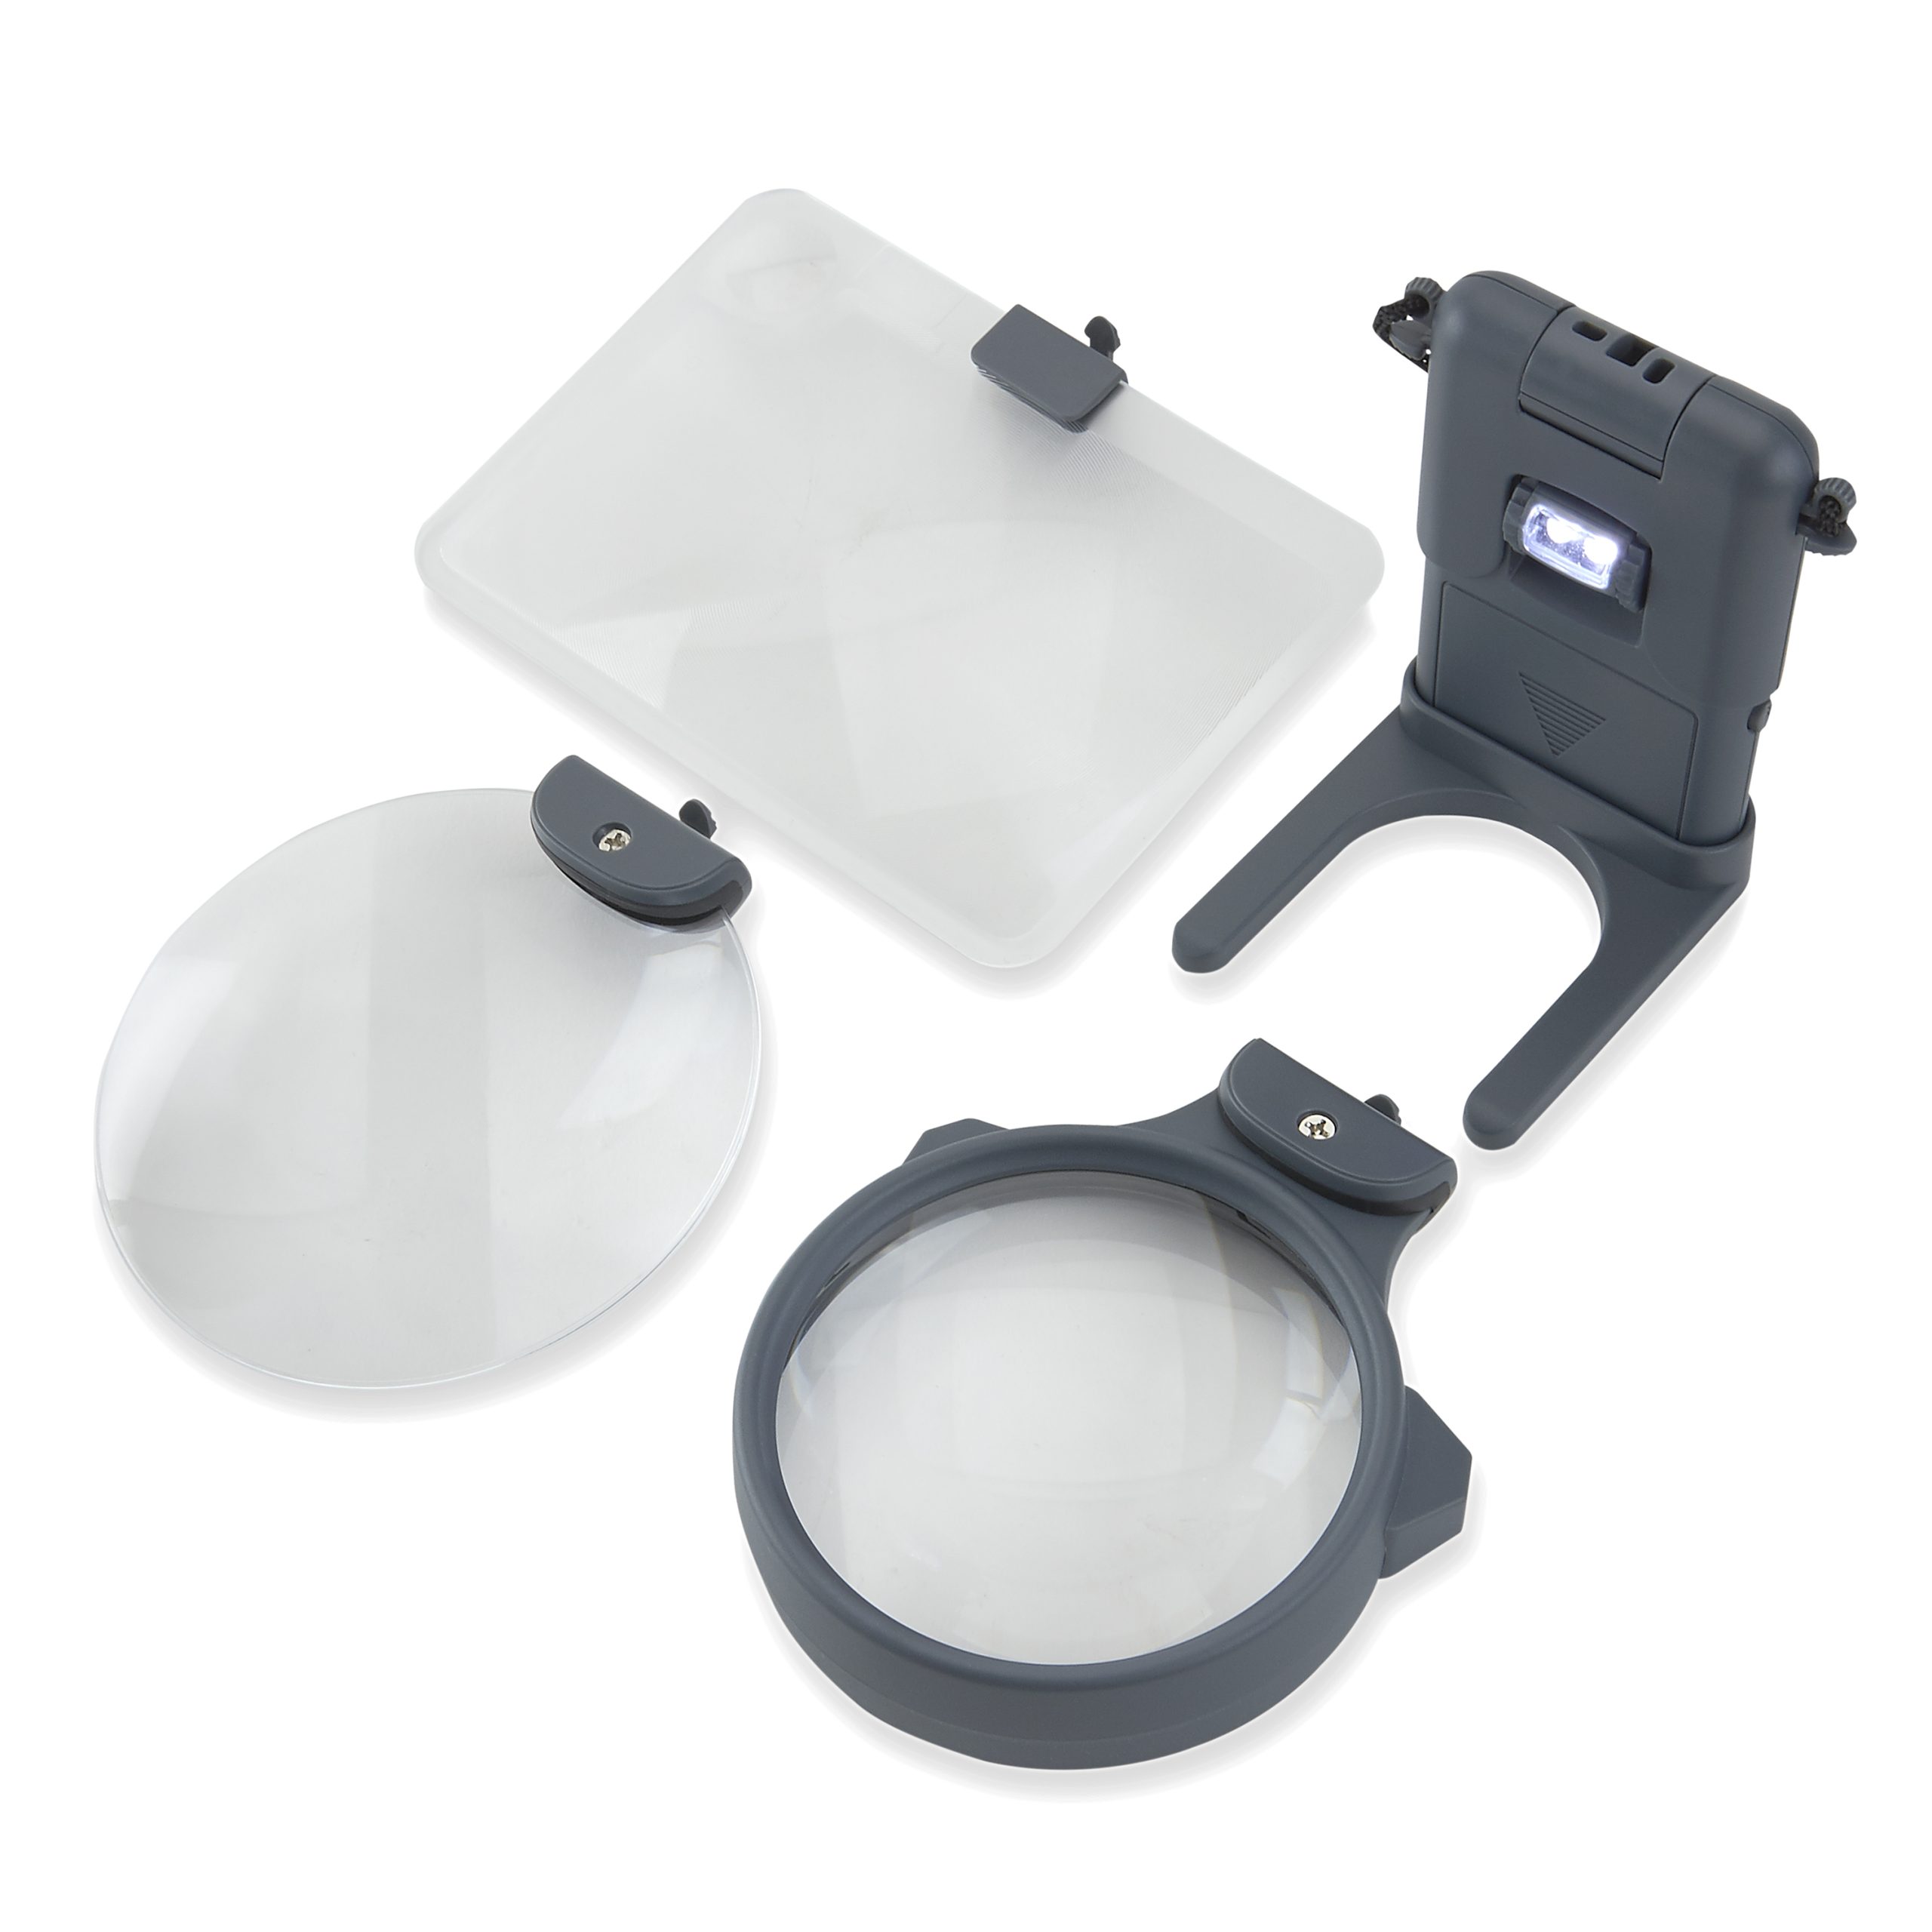 Magnifier Helping Hands Free 4x 2x Magnifying Glass Hobby Lighted Illuminated 